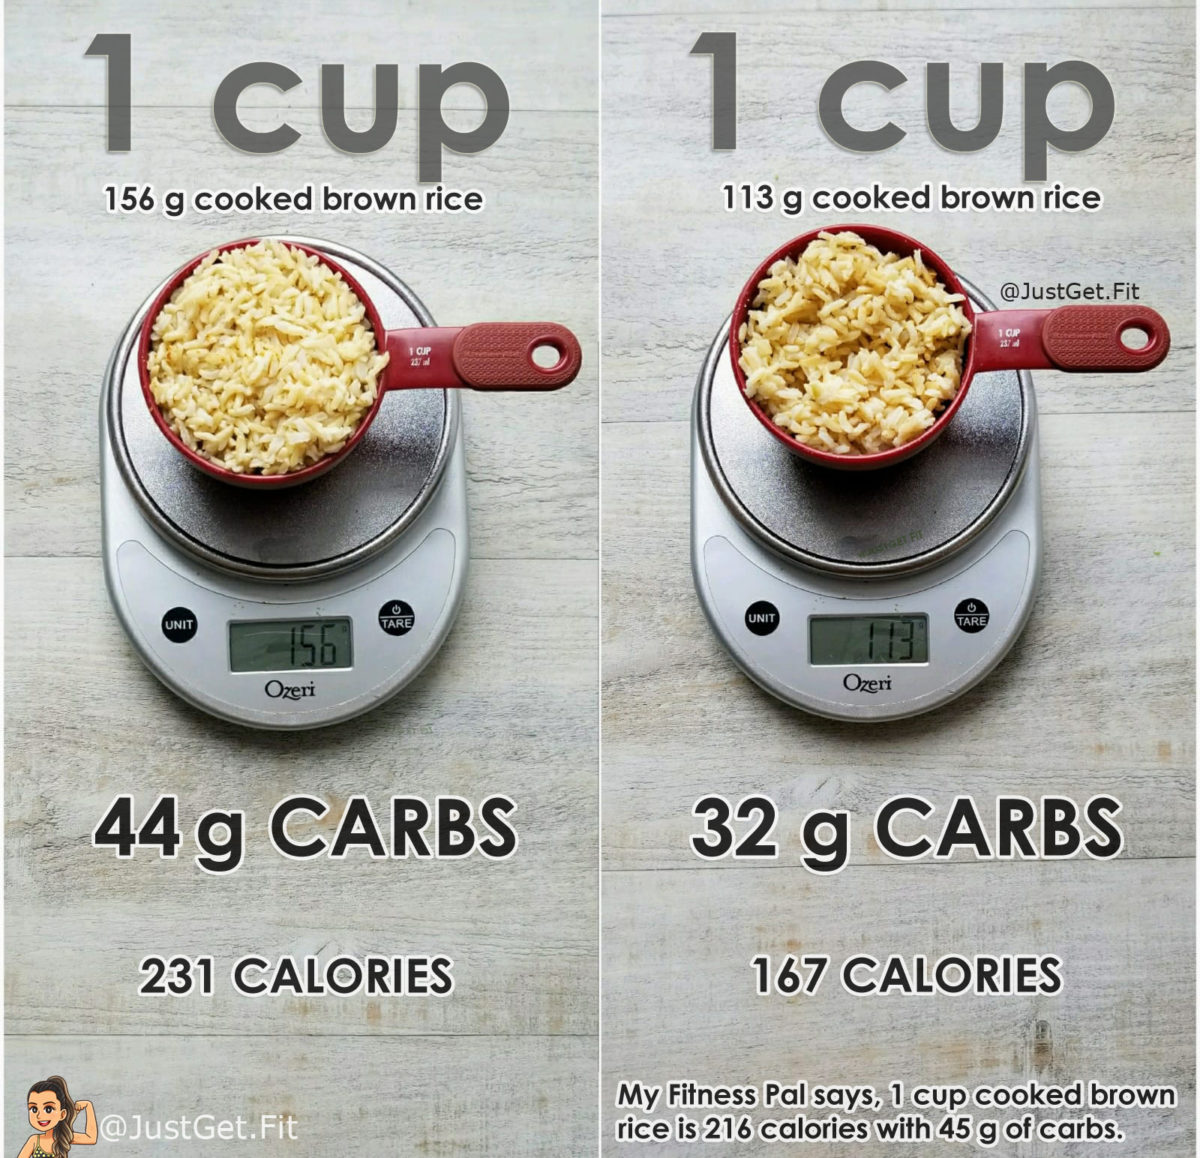 Weigh Your Food More…and You Could Weigh Less - Living Healthy